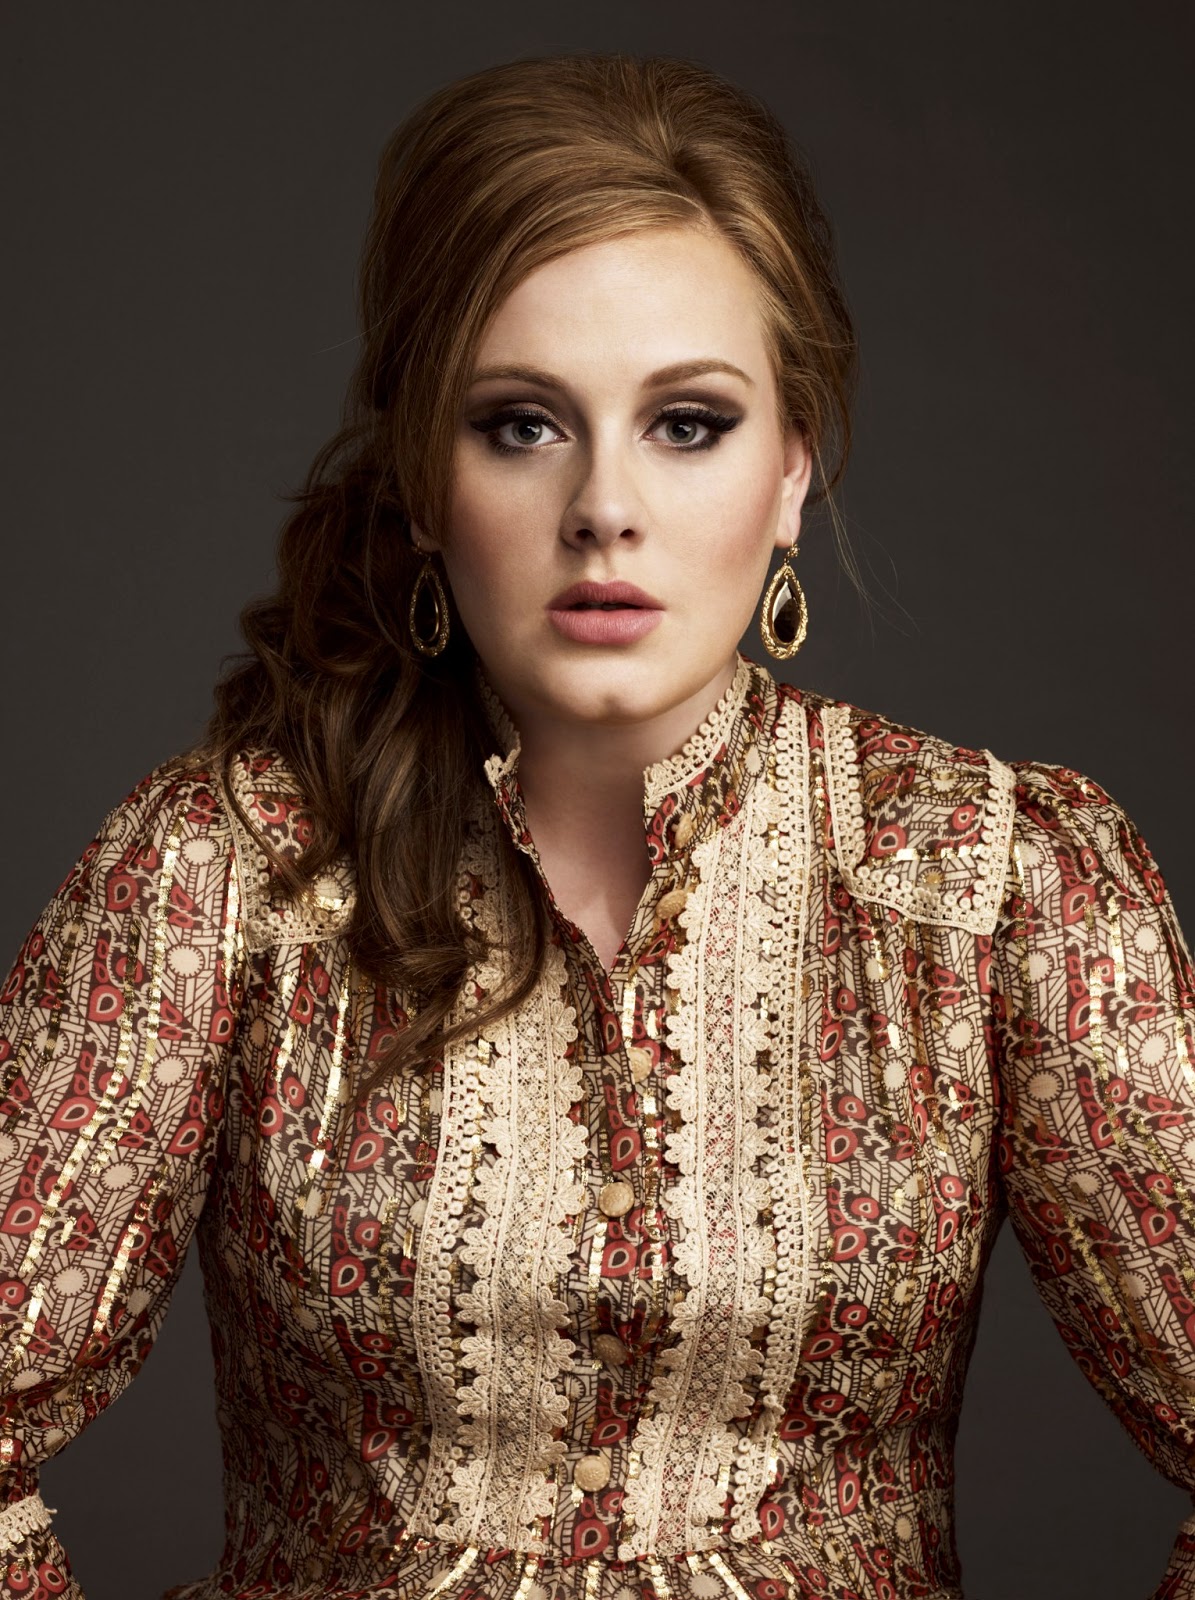 ... wallpapers adele wallpapers adele hd wallpaper adele hd wallpapers